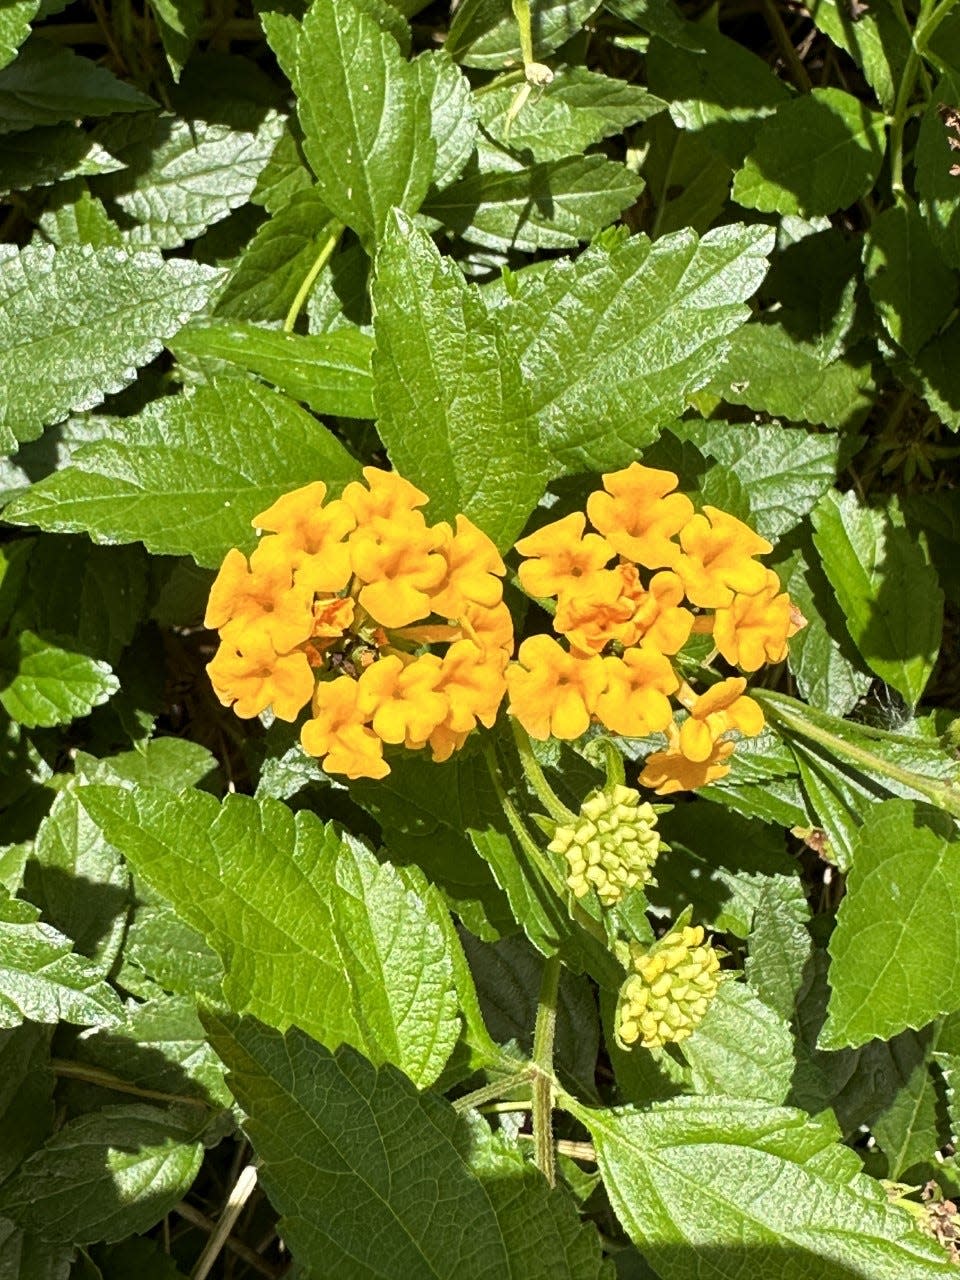 Native lantana has yellow flowers and is a low growing, spreading ground cover. It is not poisonous, but the invasive Lantana camara is.